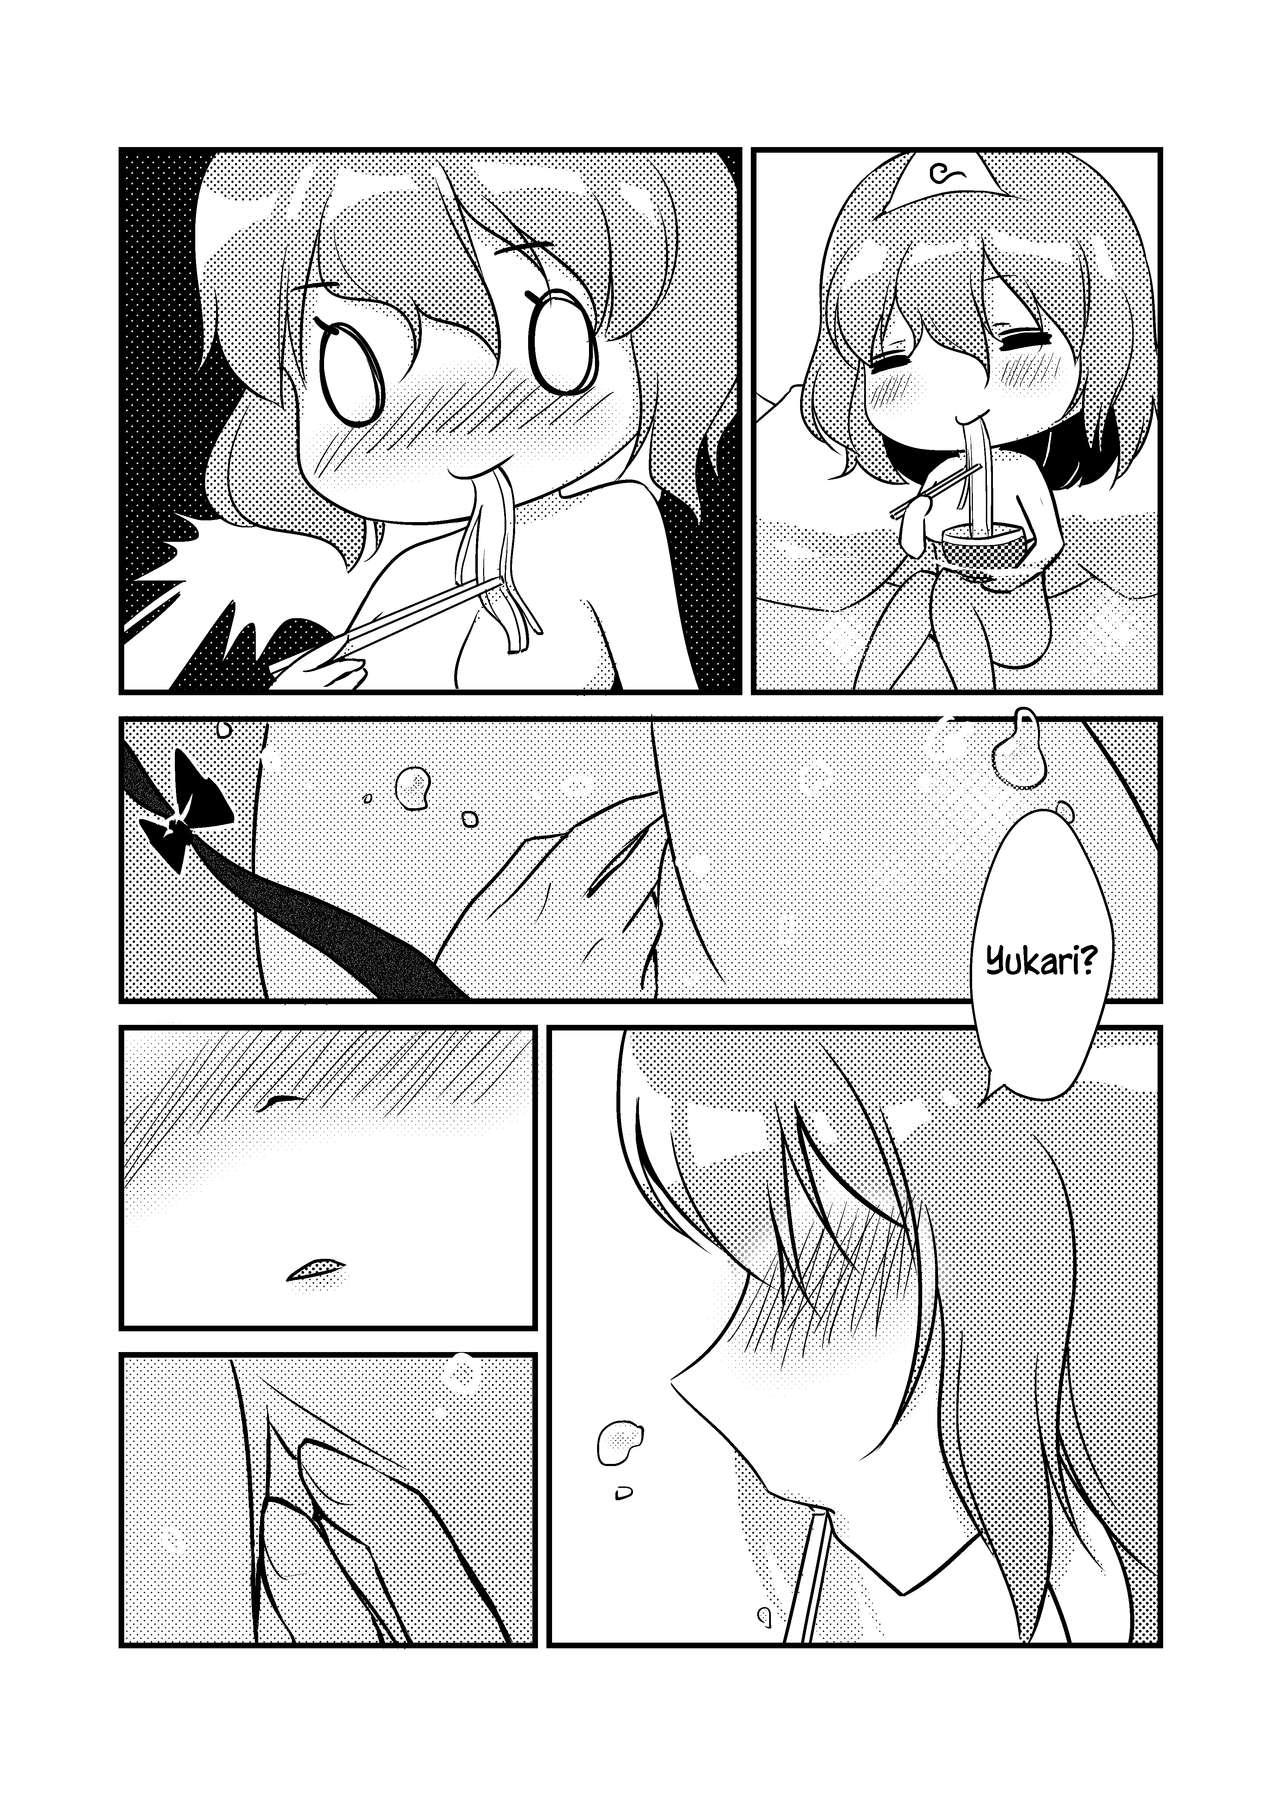 European ????一起泡温泉吧！ | ????Let's Soak in the Hot Spring! - Touhou project Outside - Page 5